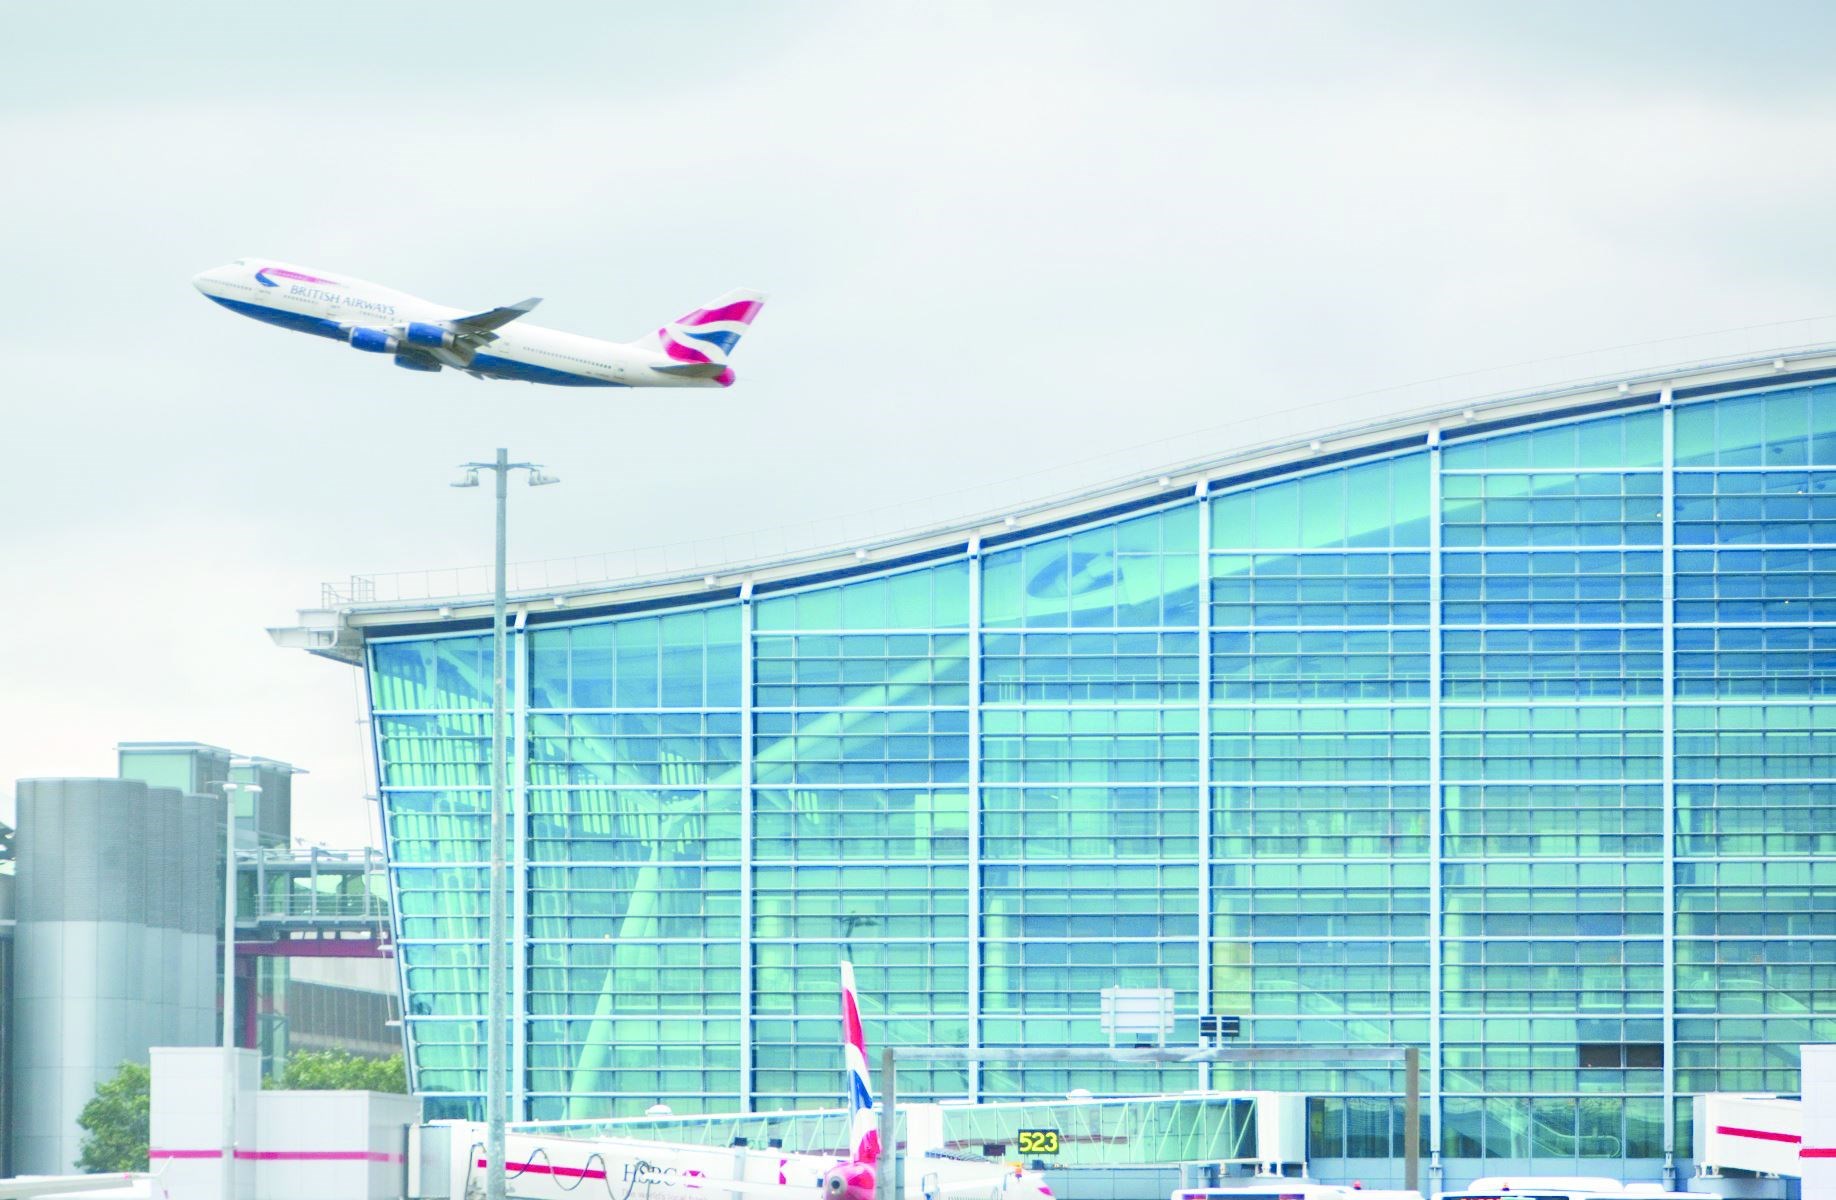 Heathrow Airport helps export billions of pounds worth of Scottish goods.